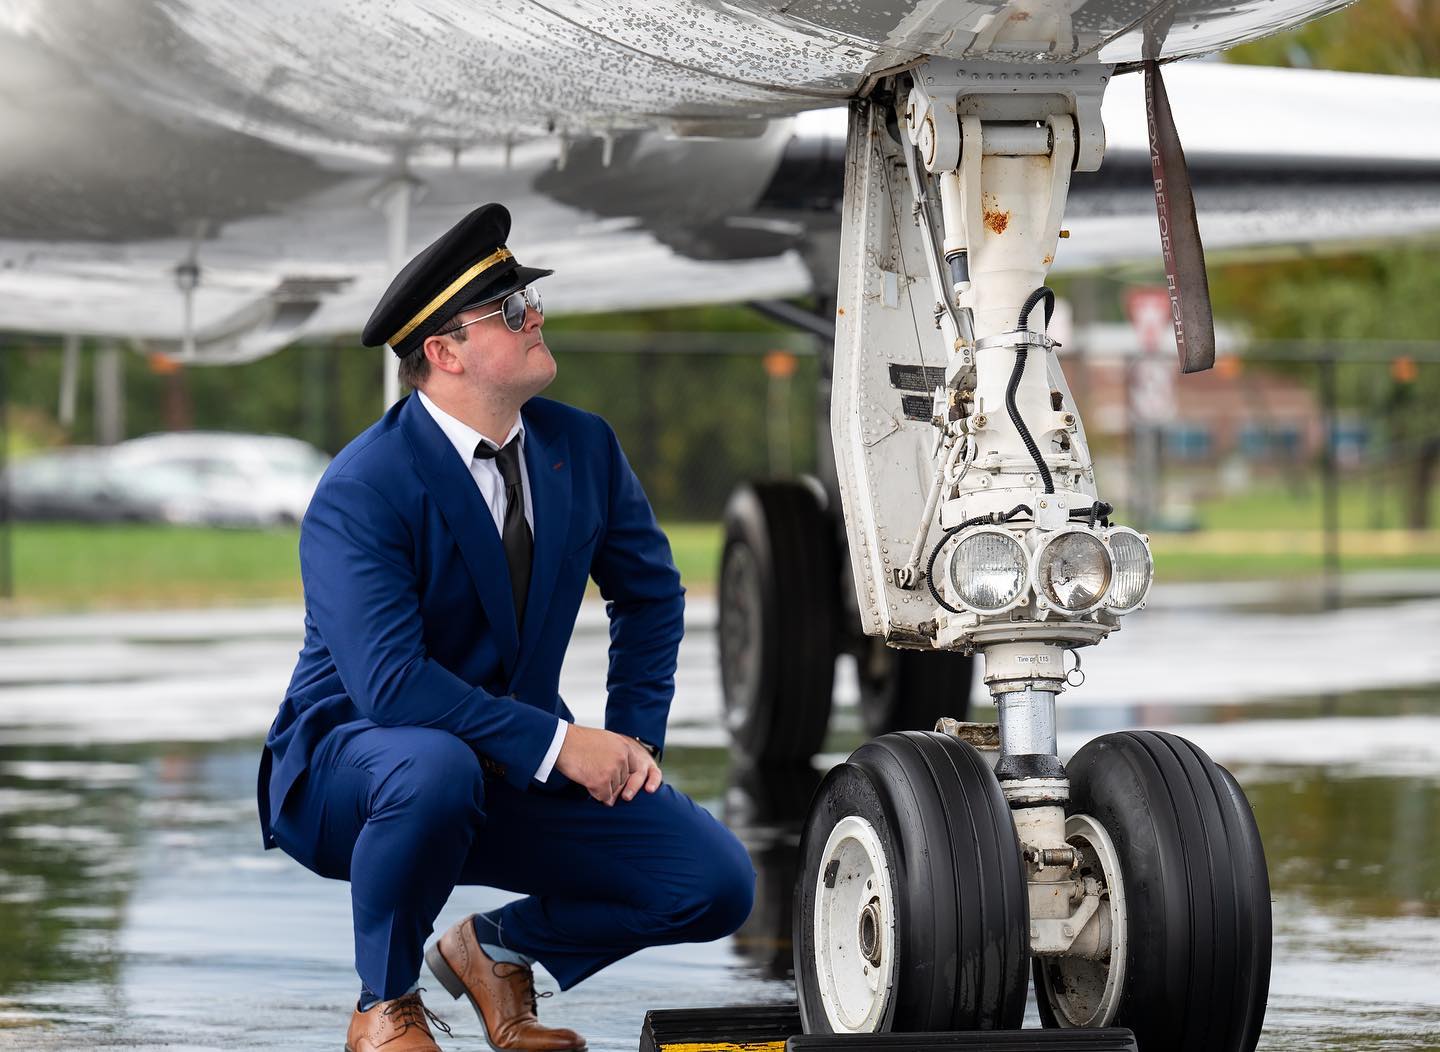 Masquerading as a Pan Am pilot, Frank Abagnale, Jr. (Brett Stockman) inspects a plane. Photo courtesy of Alan Price Photography.